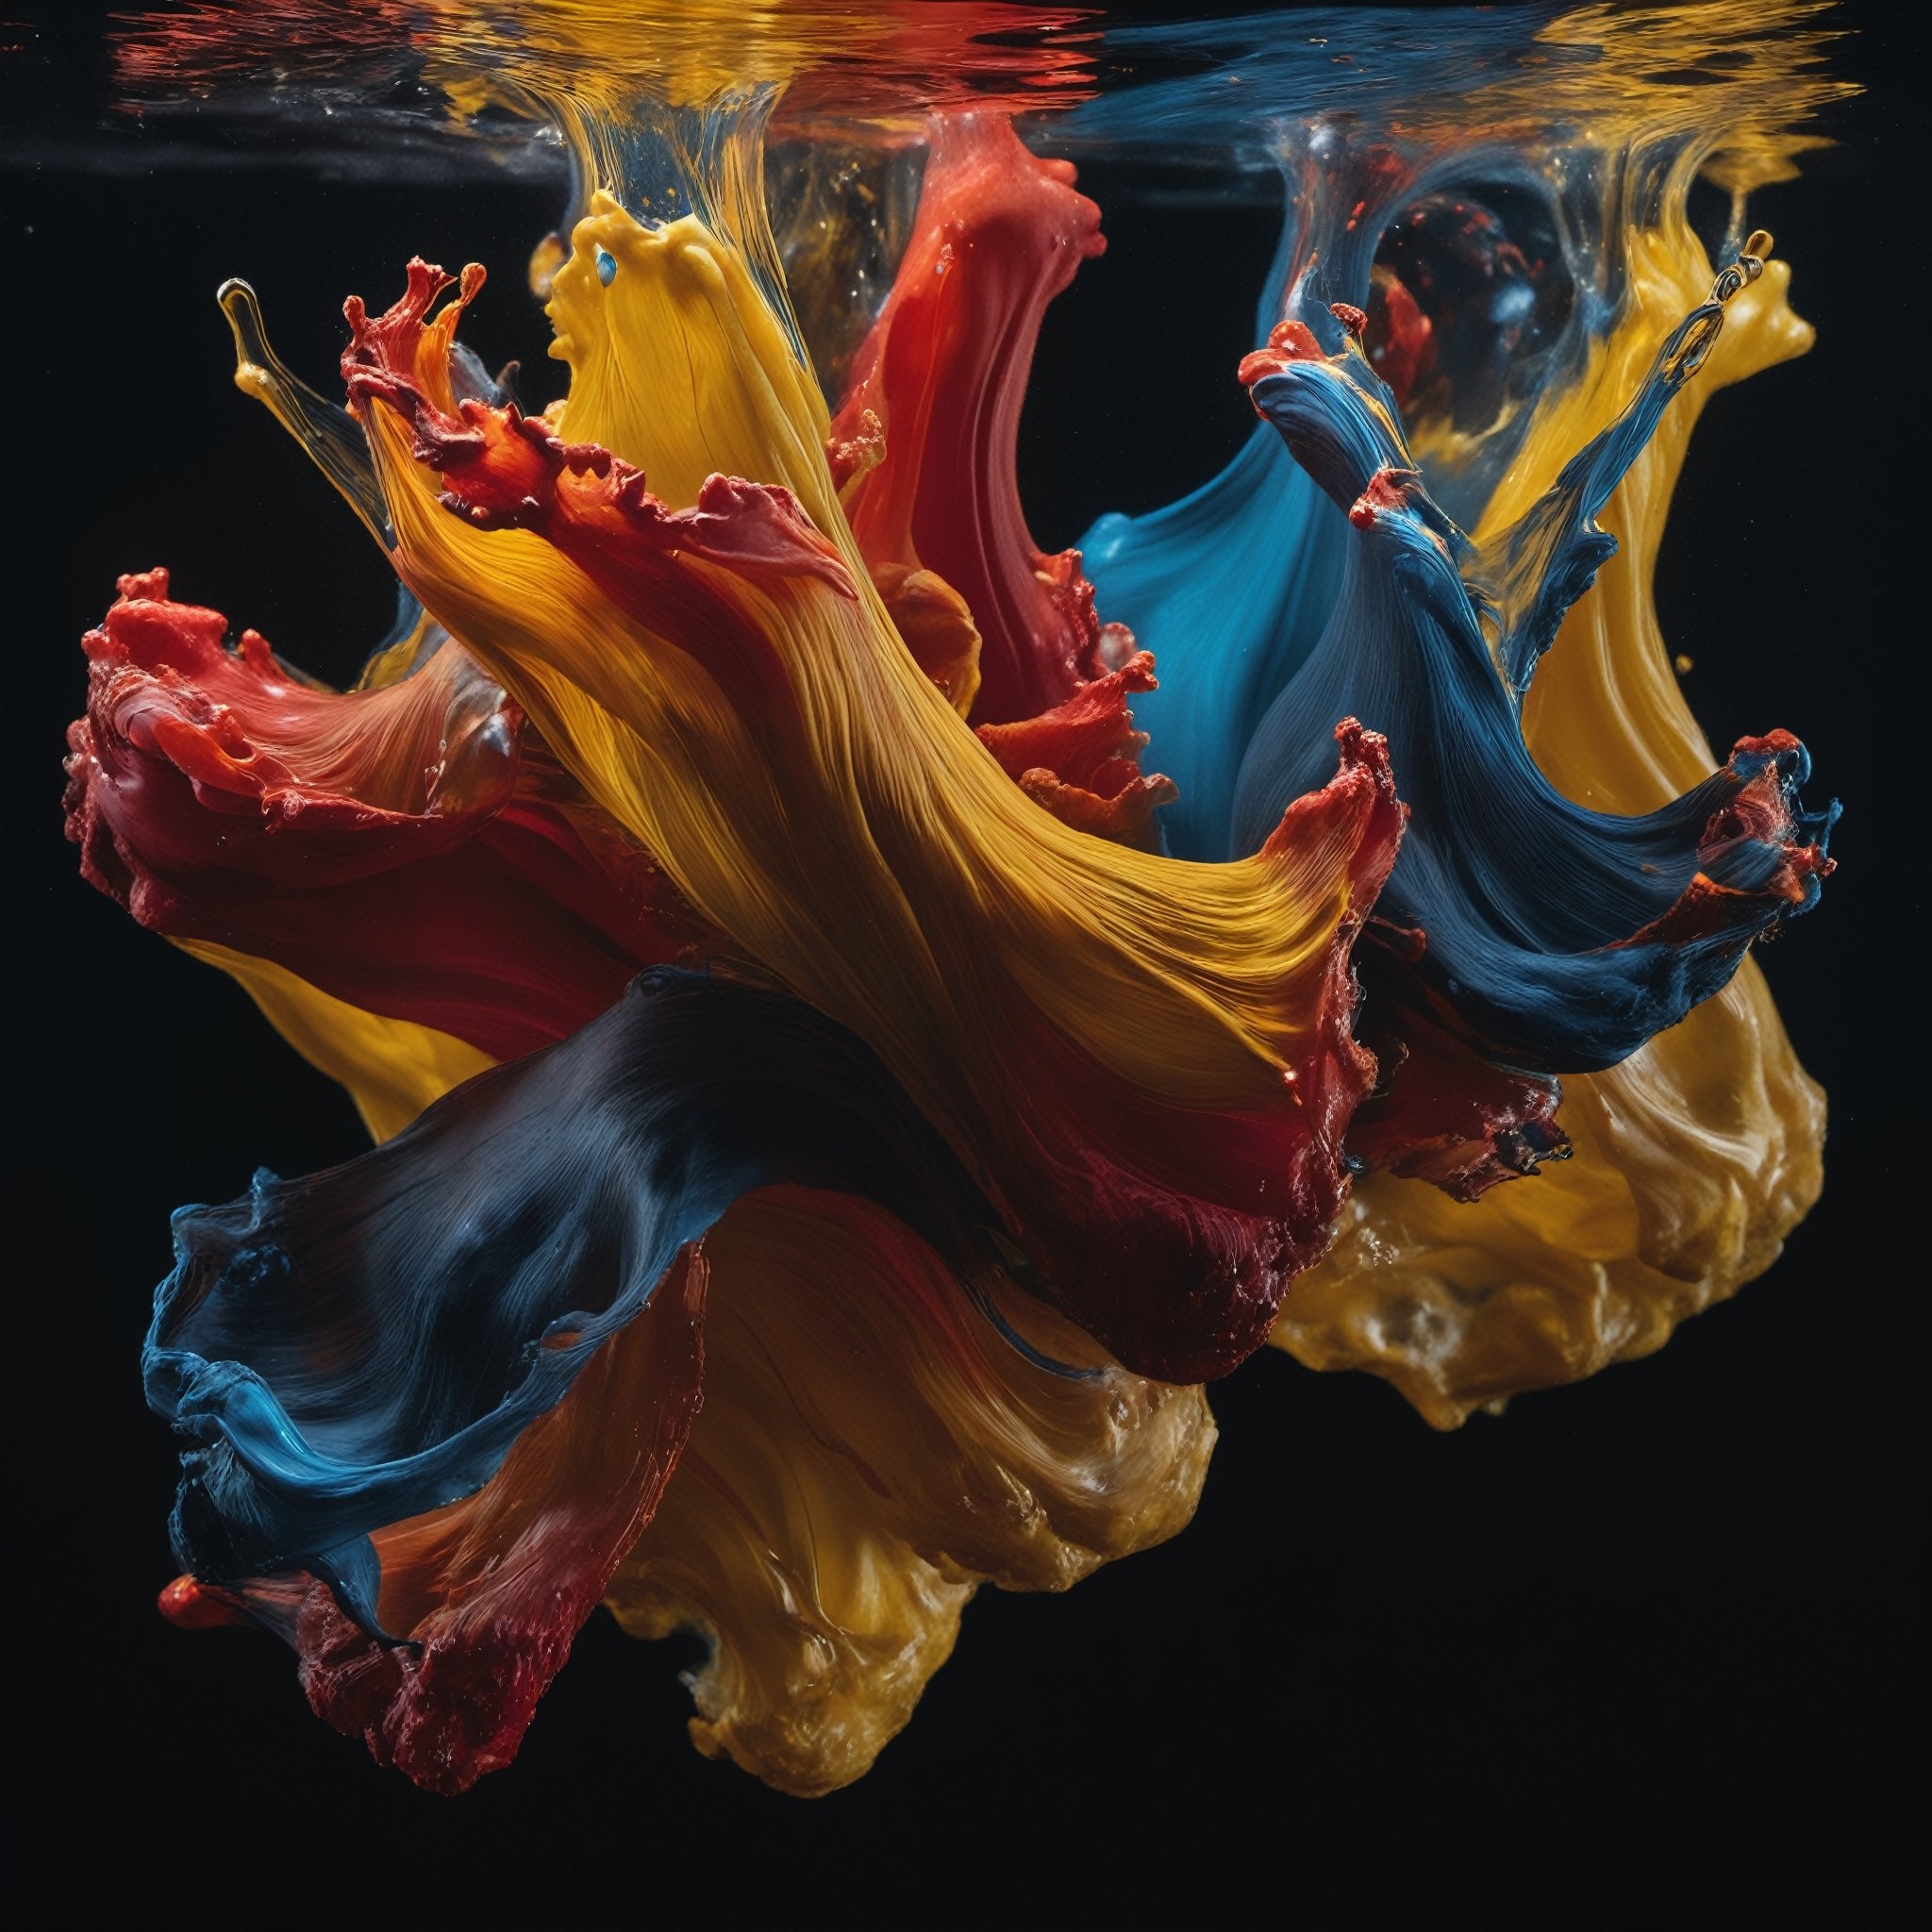 Capture the surreal beauty of a shot of oil paint submerged underwater against a dark black background. This studio photograph, shot with macro photography technique, reveals the hypnotic dance of red, yellow and blue tones of the oil paint dispersing in the water, creating an ephemeral and captivating work of art,